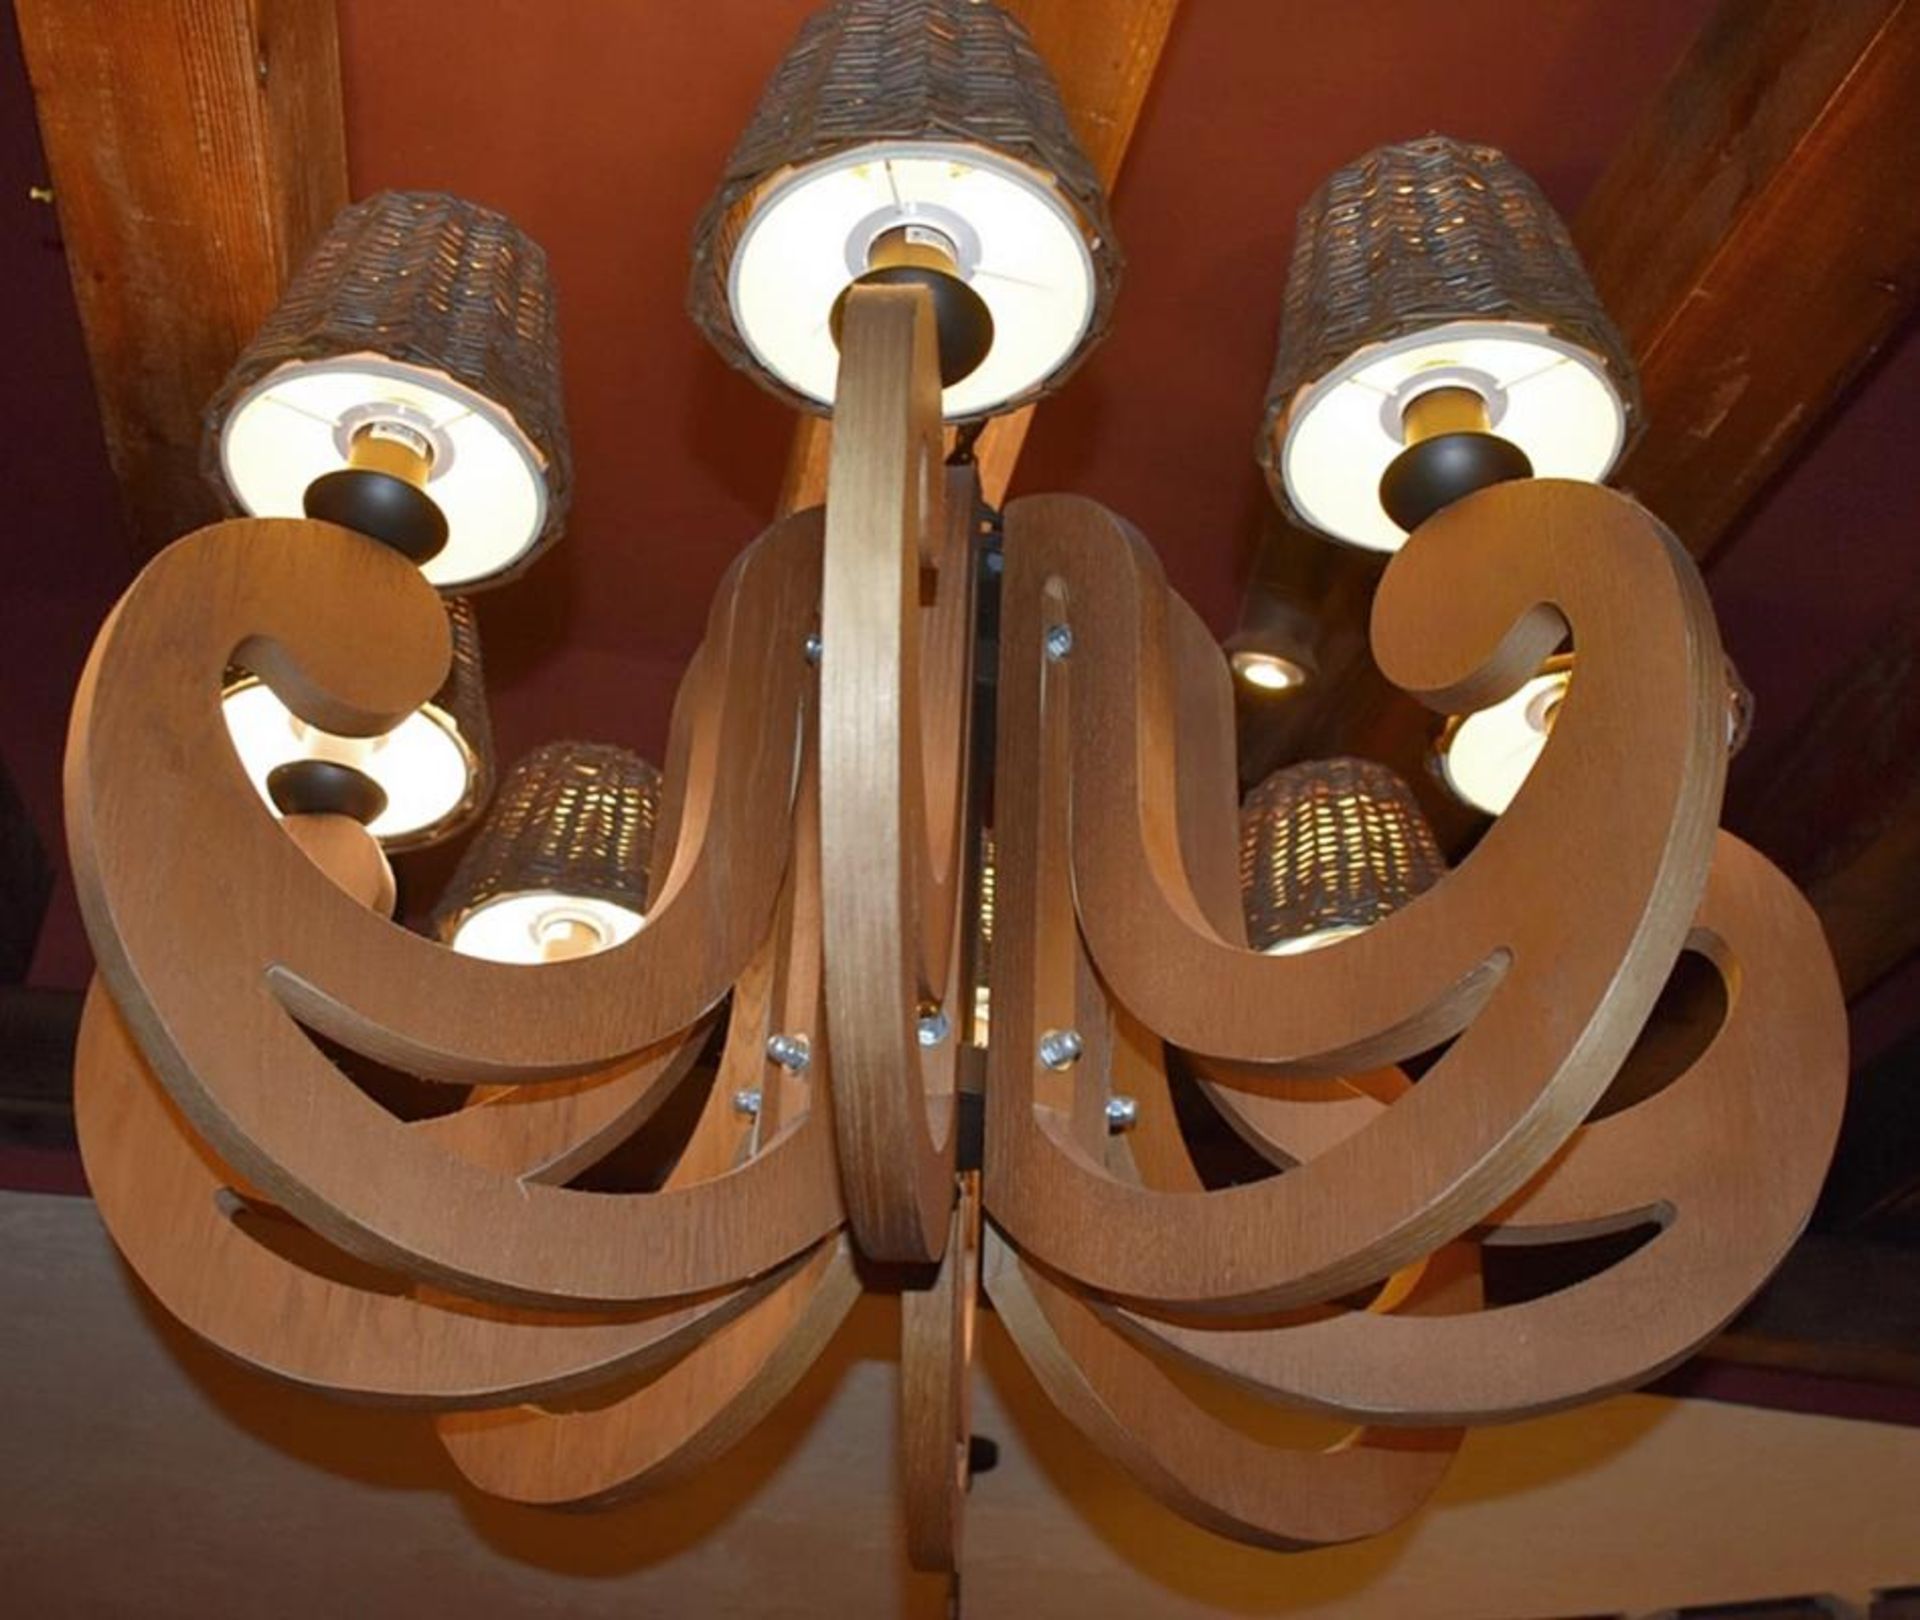 1 x Artisan Wooden Candelabra 8 Light Chandelier With Rustic Basket Shades - Dimensions: Approx - Image 2 of 6